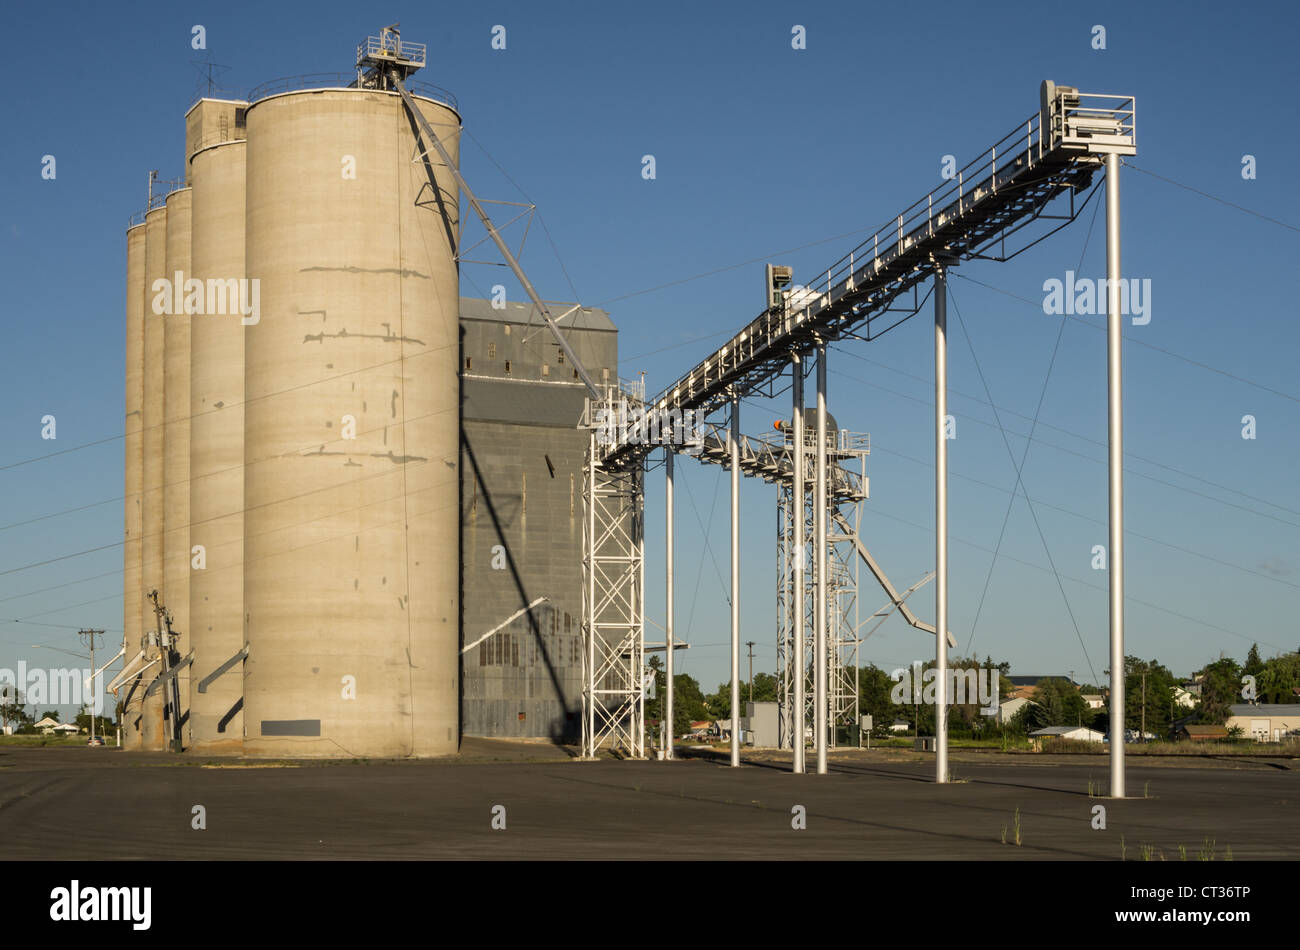 A group of grain elevators or storage silos Stock Photo